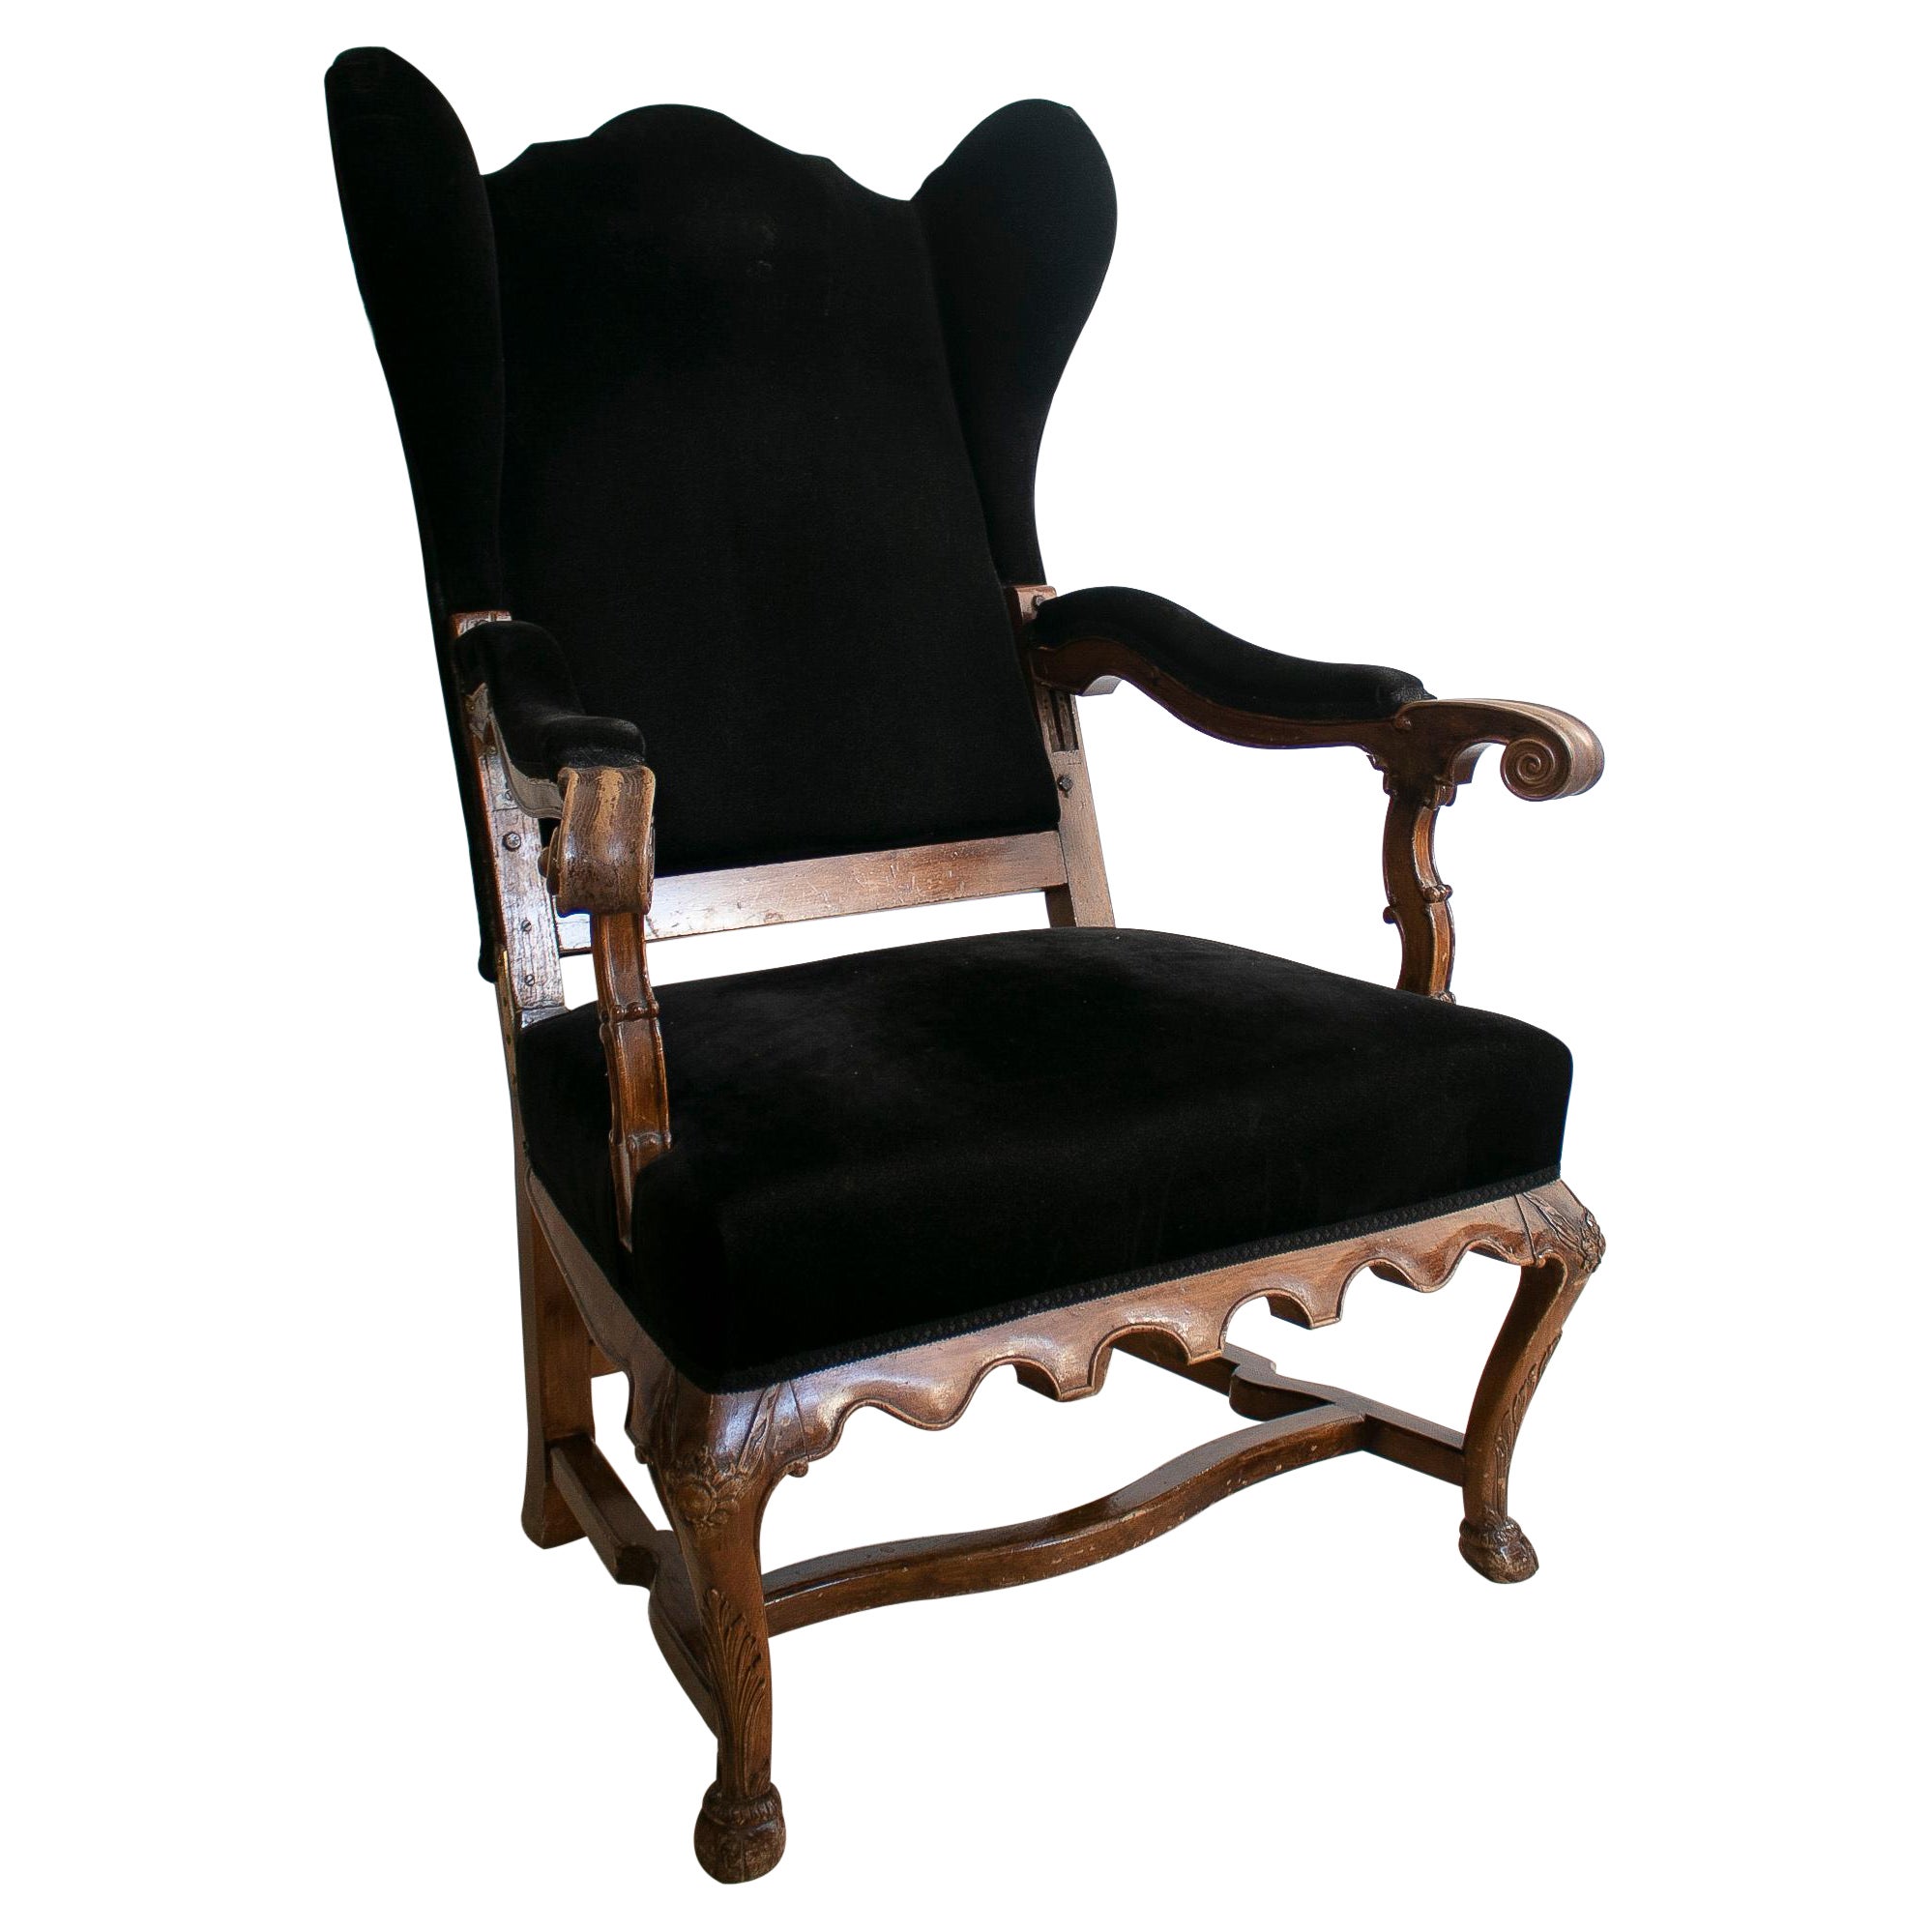 19th Century English Wooden Winged Armchair w/ Velvet Upholstery For Sale